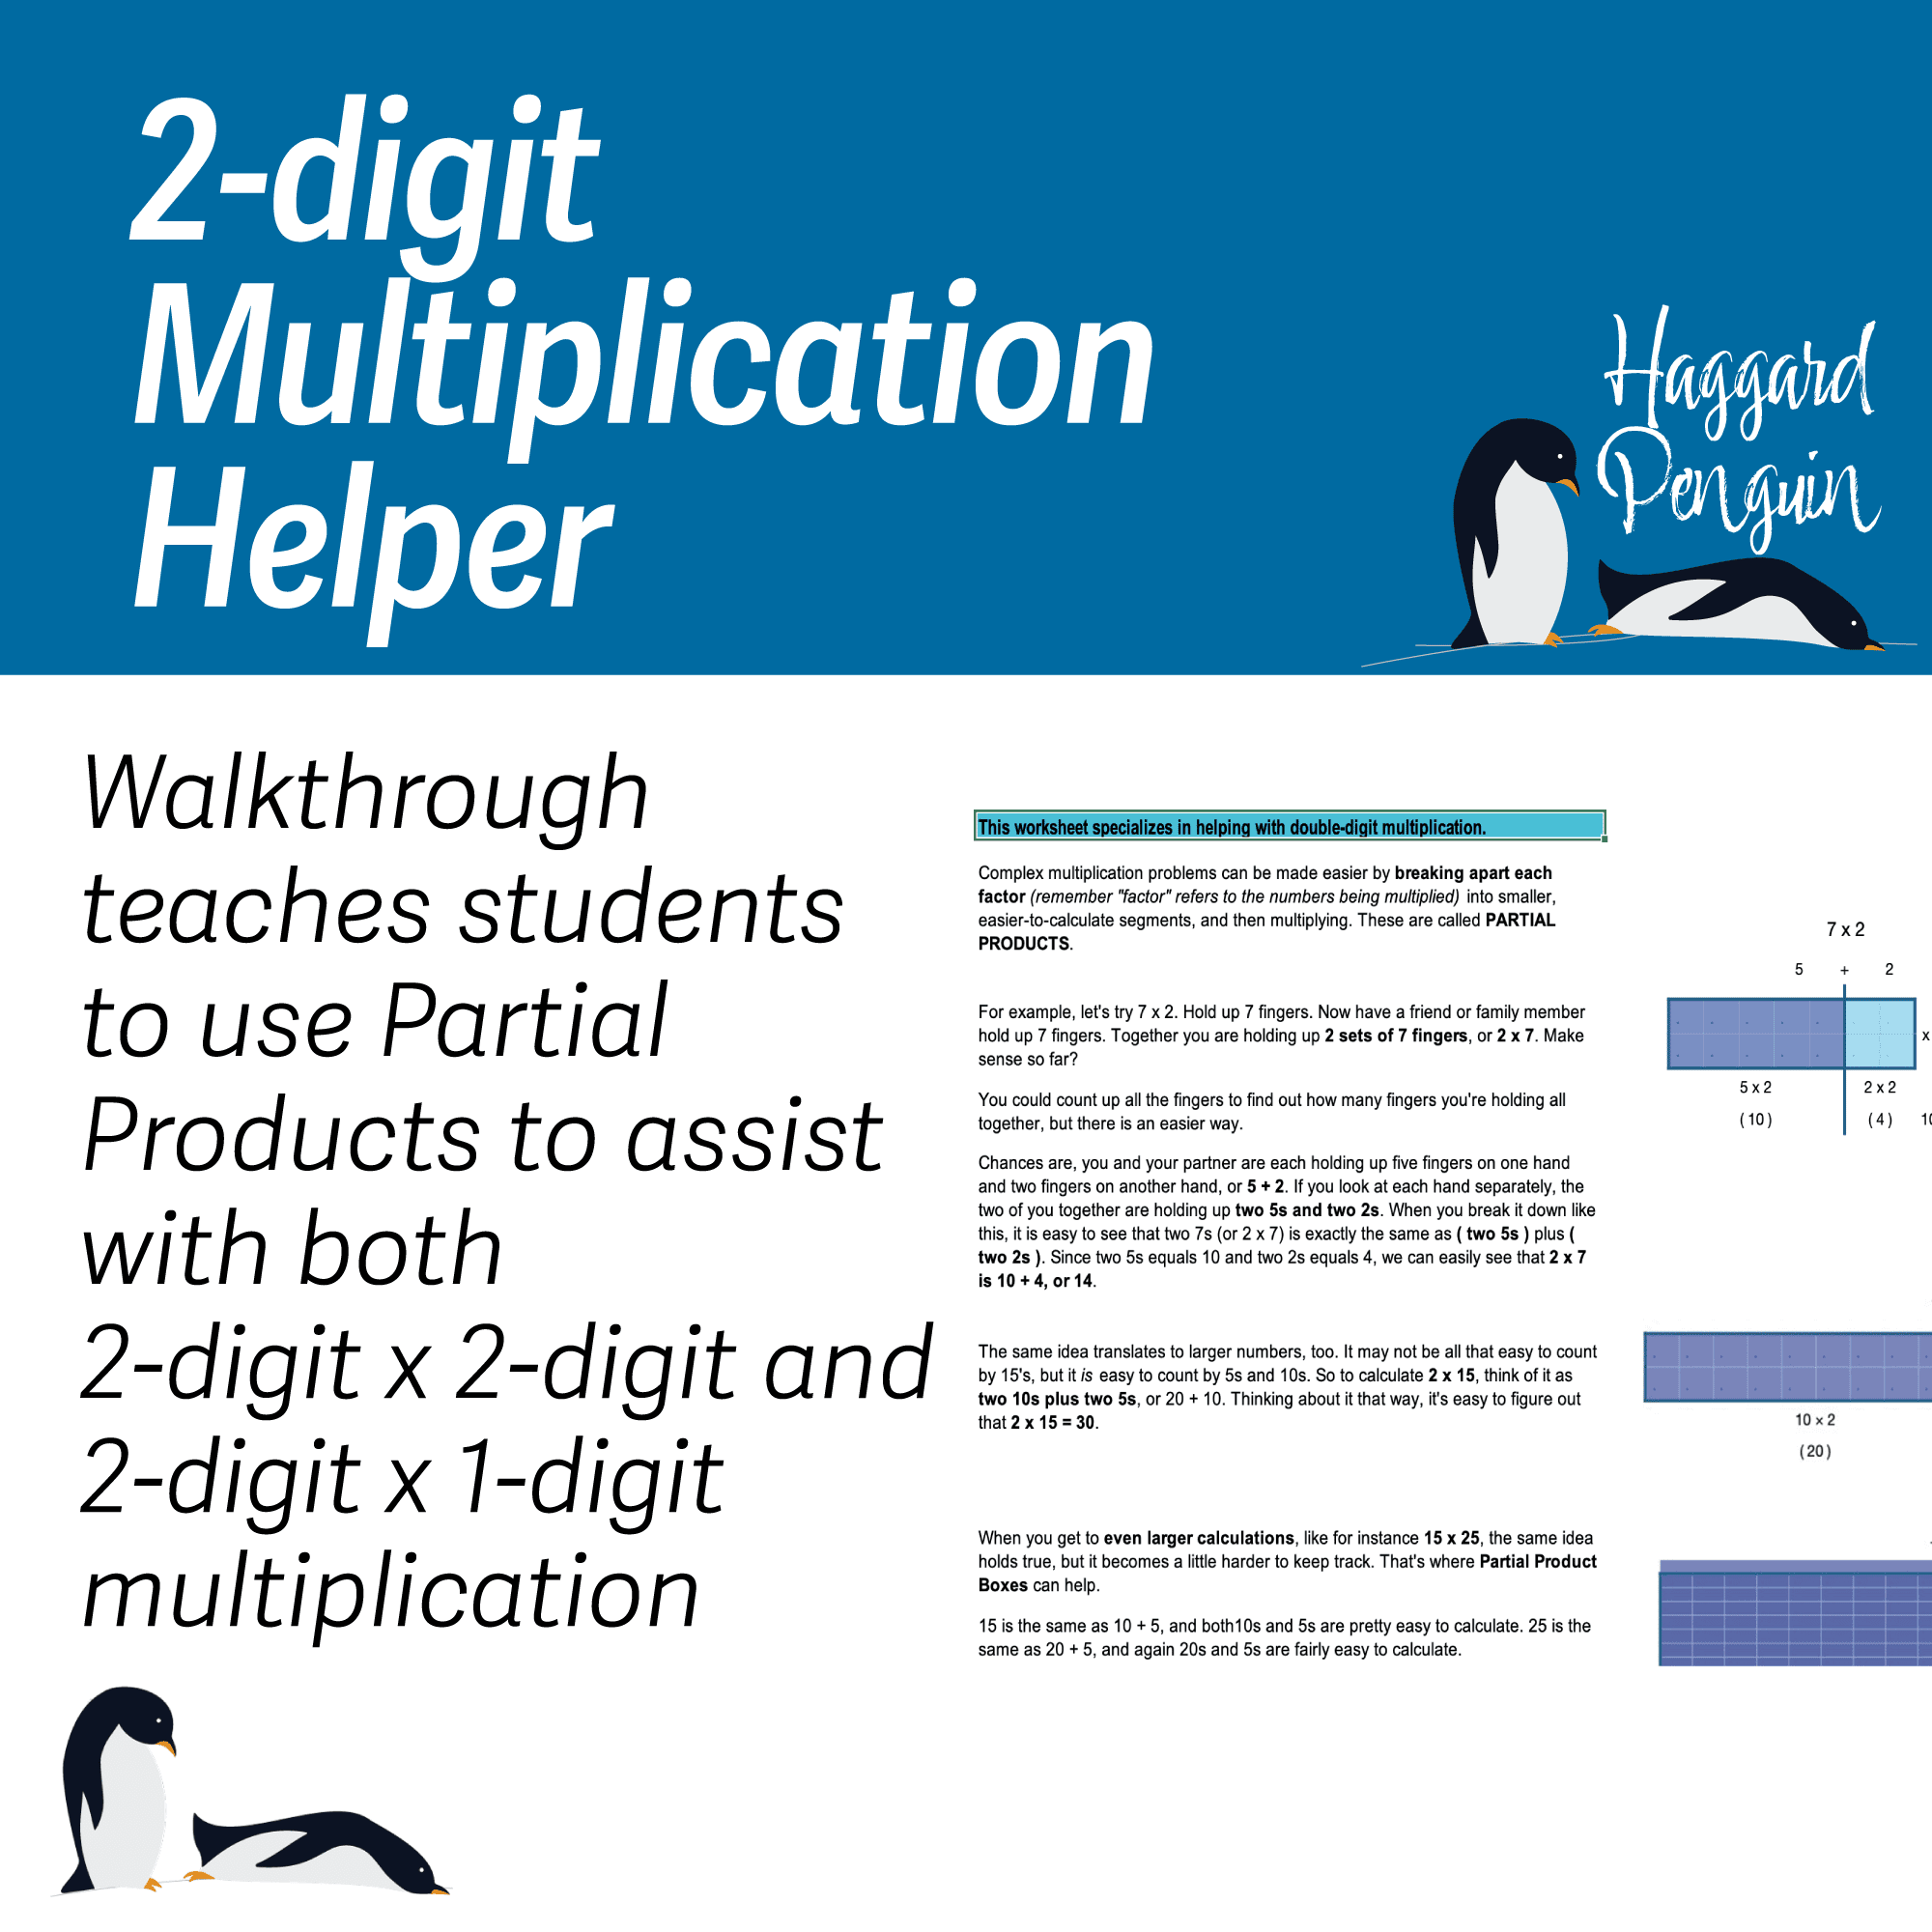 Walkthrough teaches students how to use partial products to assist with 2-digit x 2-digit and 2-digit x 1-digit multiplication